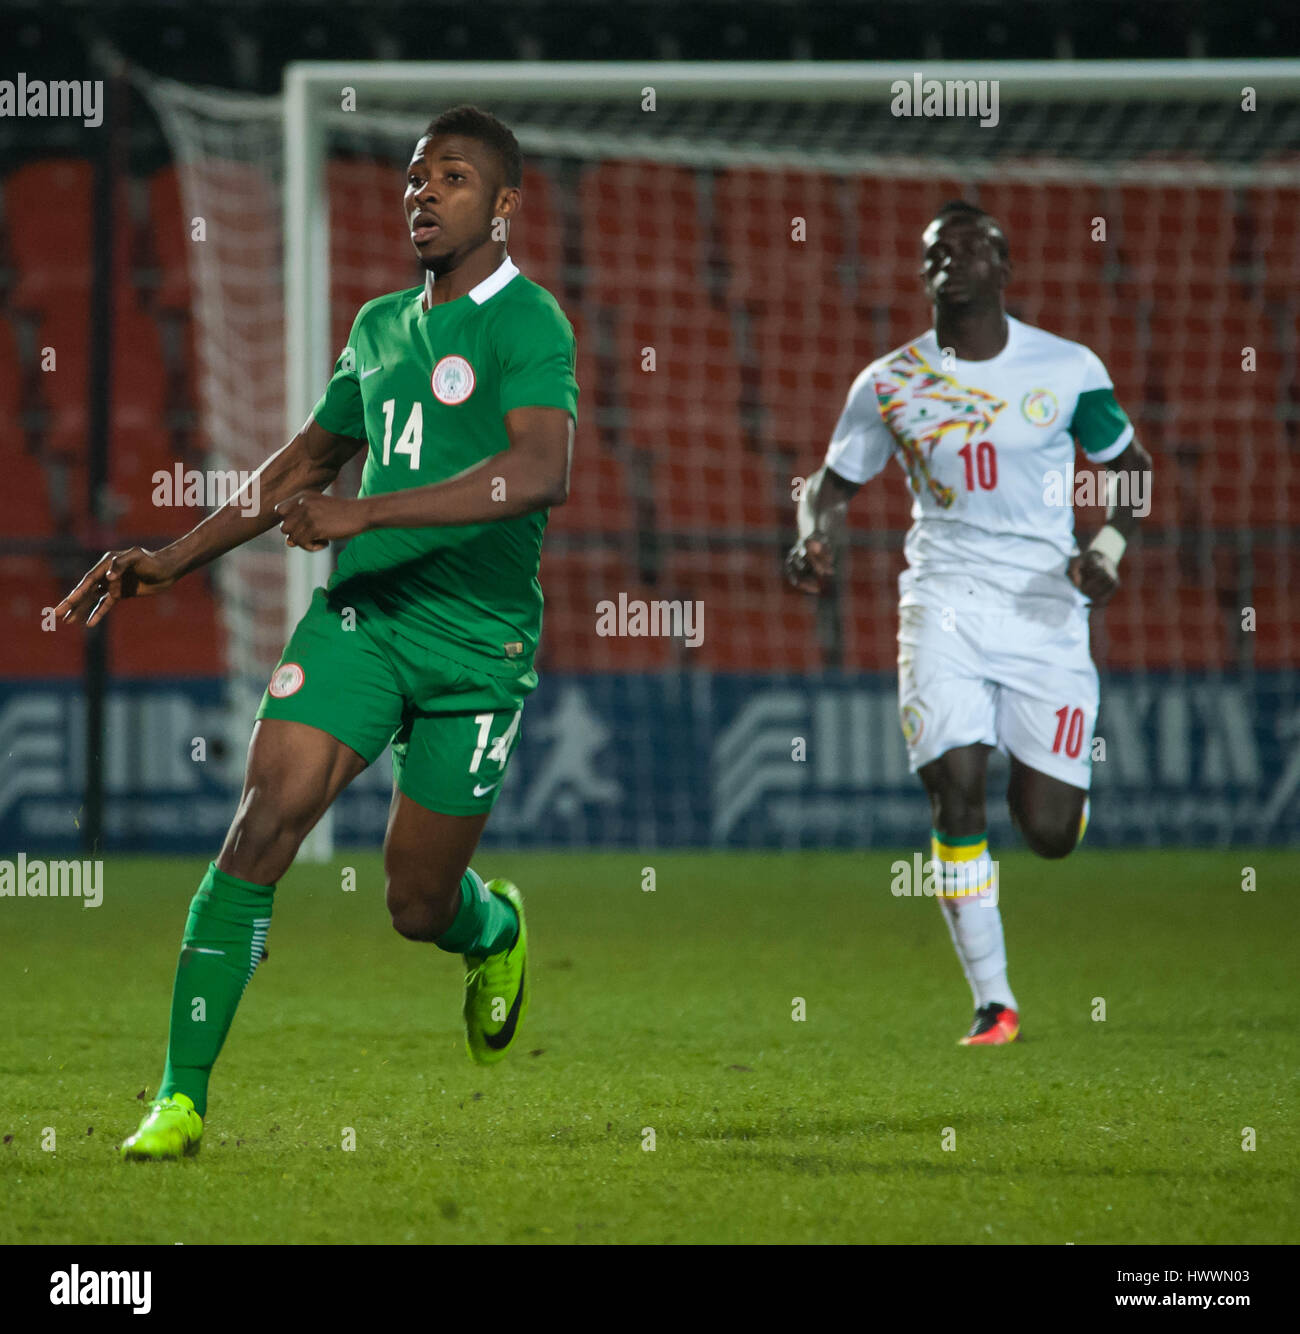 The Hive, Barnet,  England. 23rd March 2017. Kelechi Iheanacho of Nigeria  during the International Friendly match between Nigeria and Senegal. Michael Tubi / Alamy Live News Stock Photo